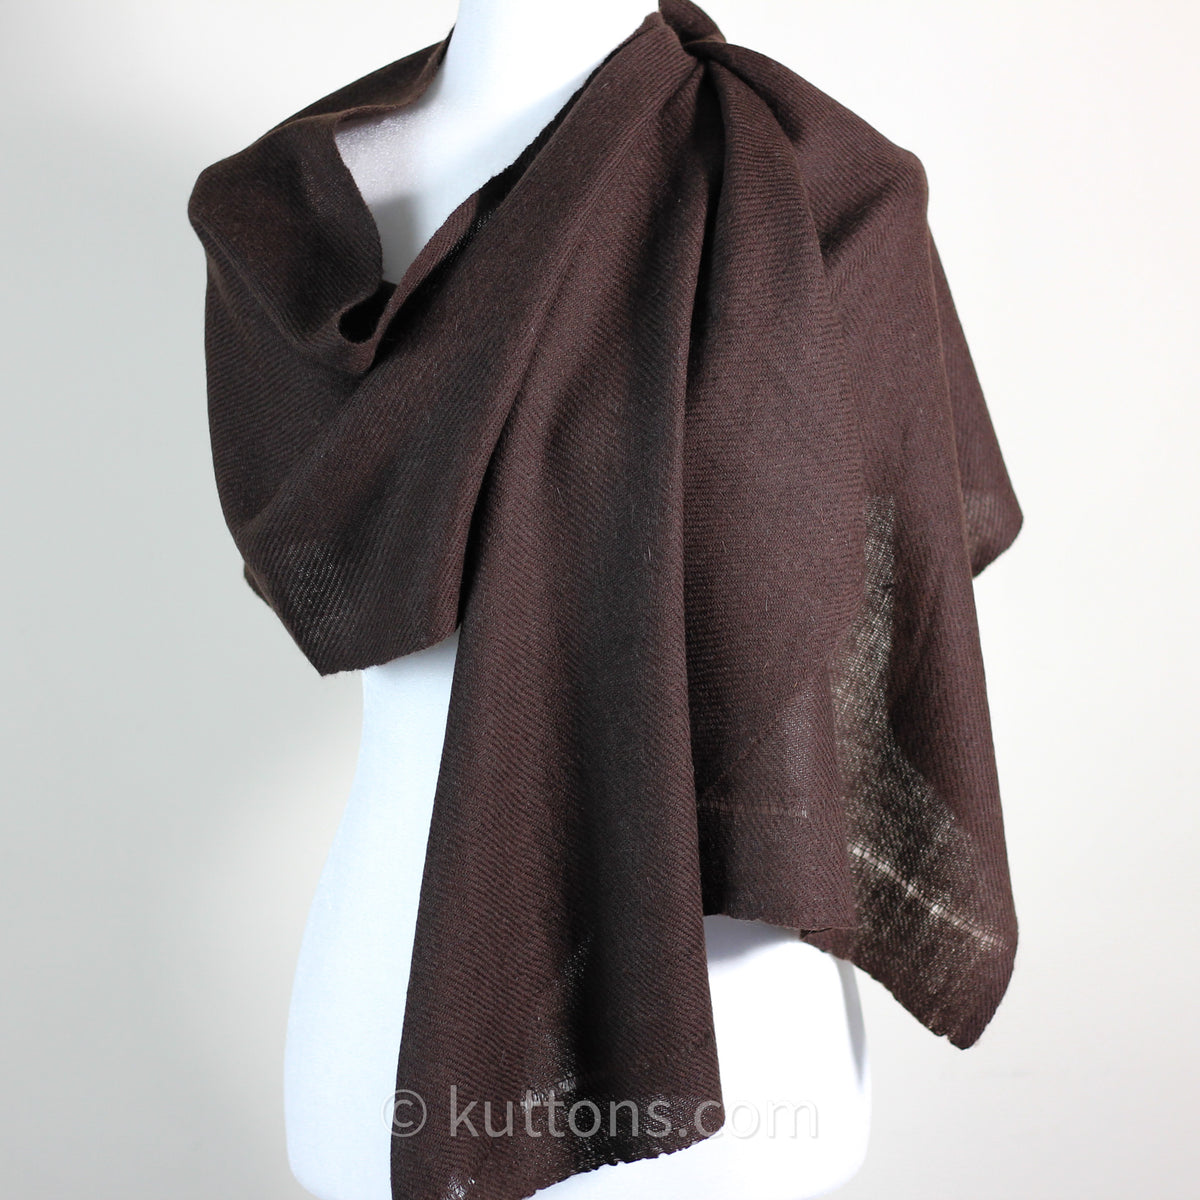 100% Pure Ladakh Yak Wool Scarf - Handspun and Handwoven Stole by Women Weavers in the Himalayas | Dark Brown, 13x76"